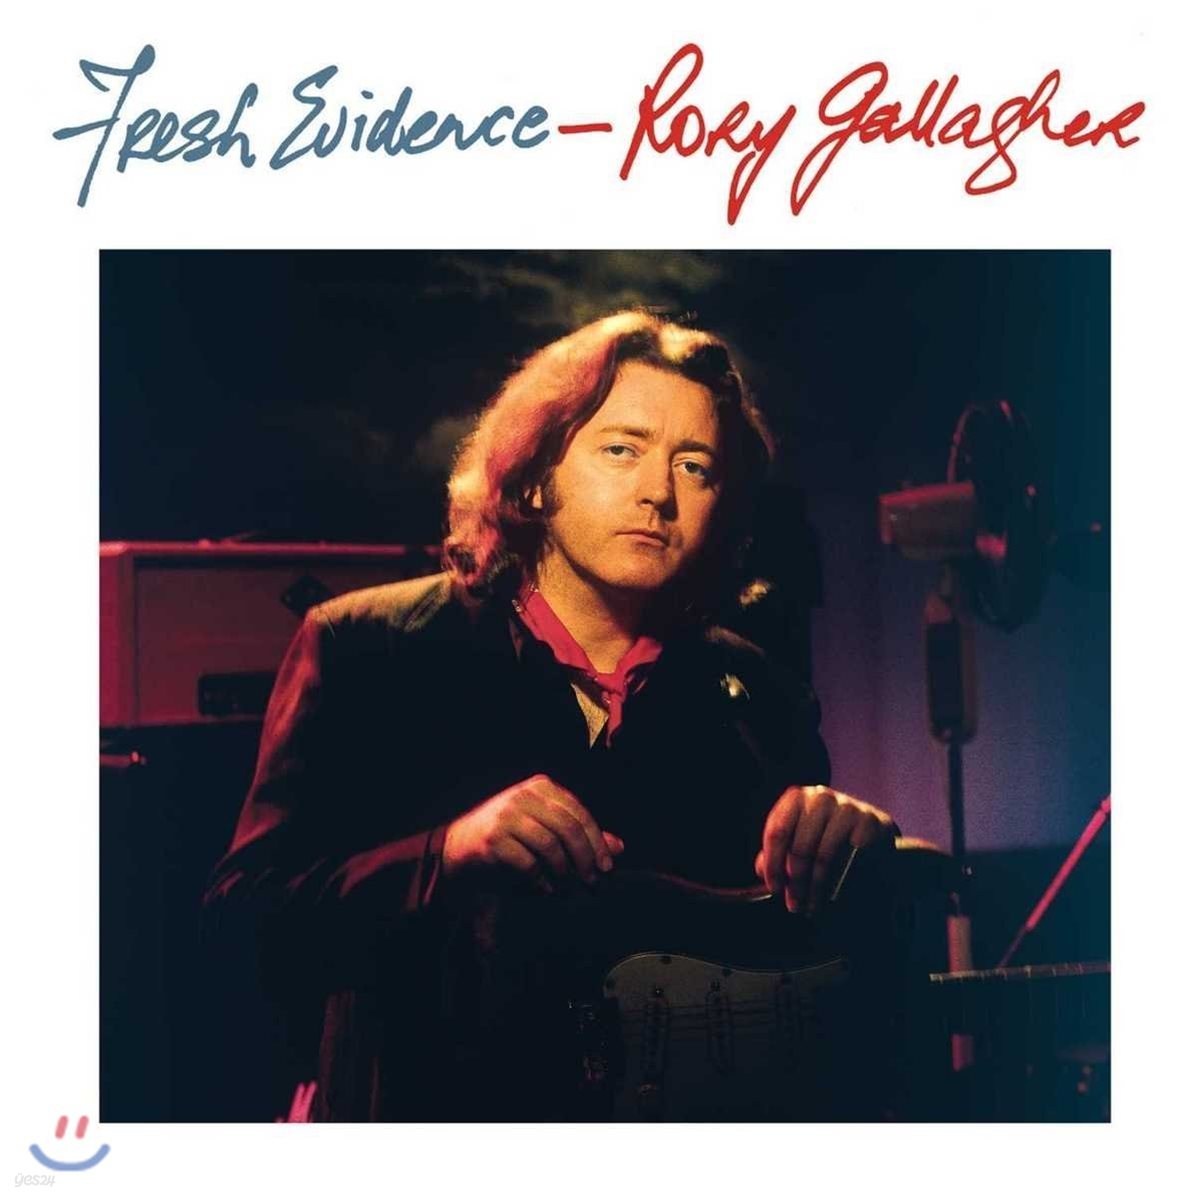 Rory Gallagher (로리 갤러거) - Fresh Evidence